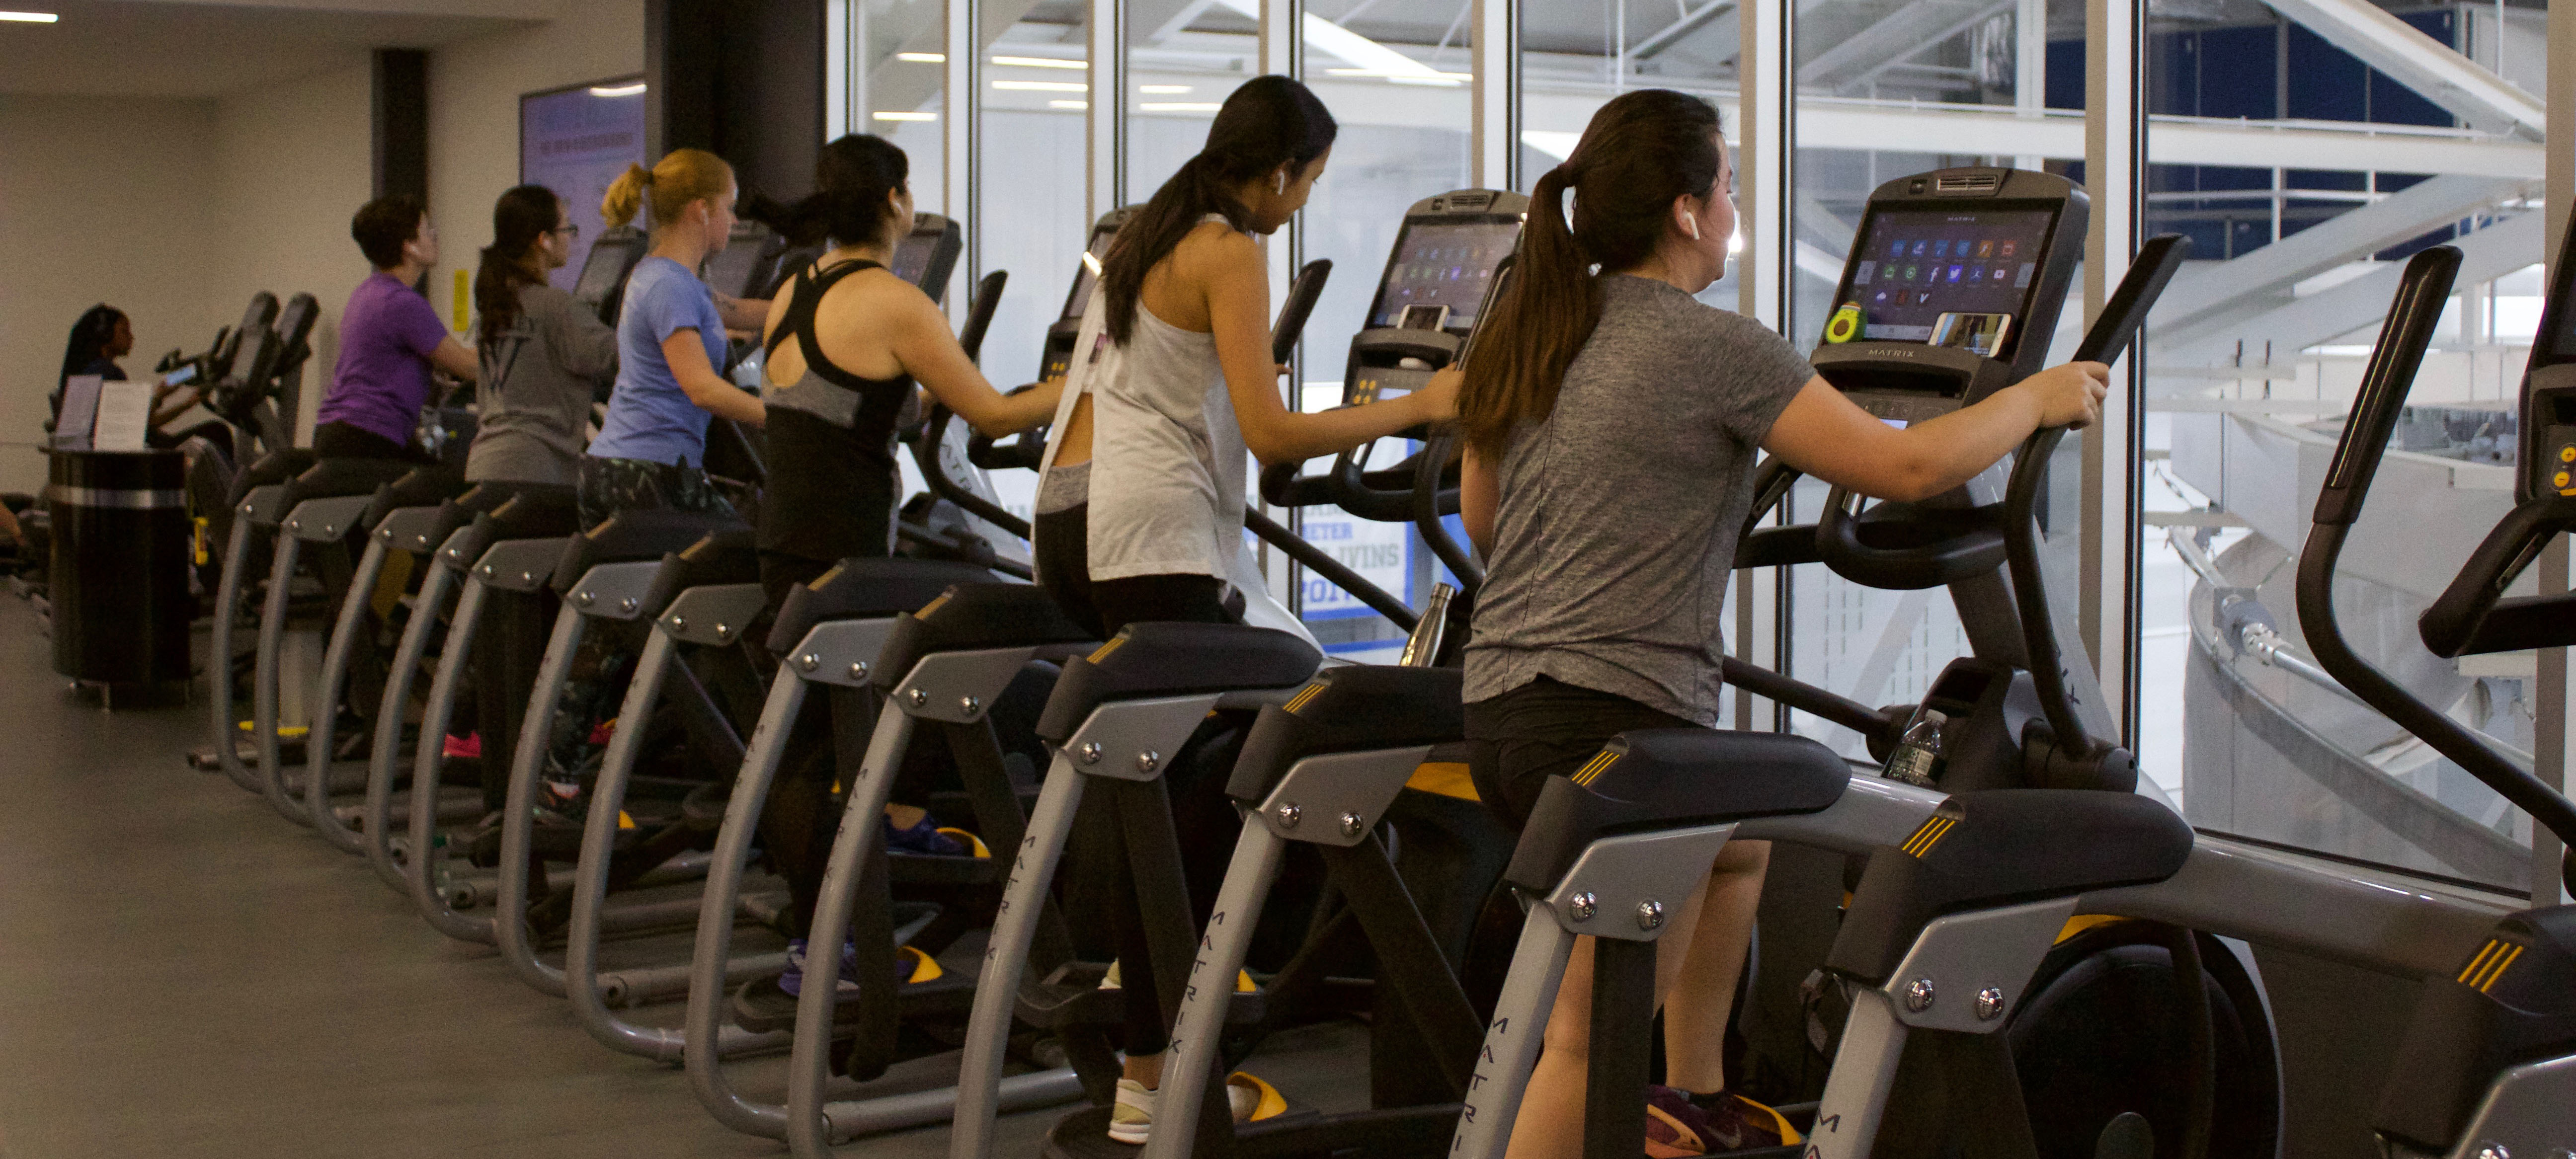 Each elliptical in the KSC is occupied with an exercising student. They are all facing away from the camera, focused. 